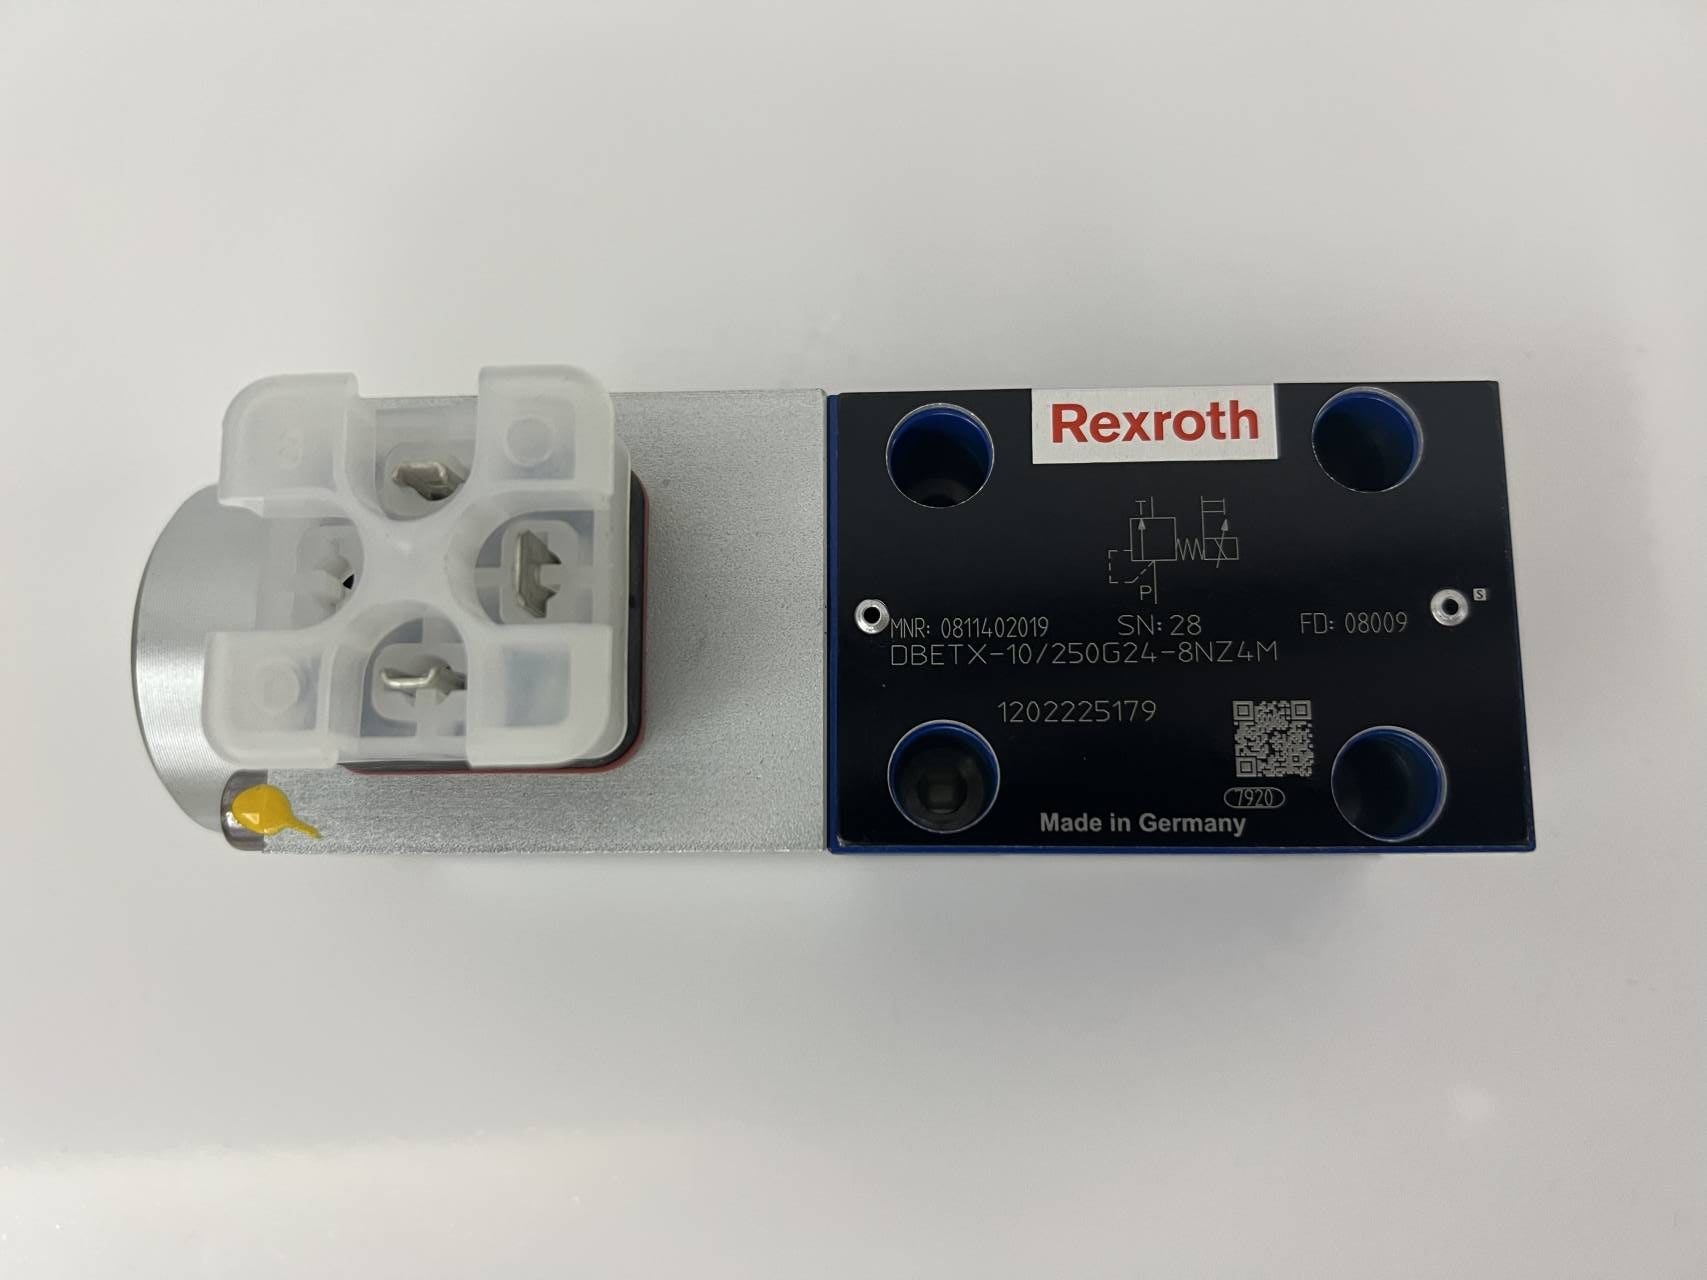 Rexroth DBETX Series DBETX-1X Proportional Relief Hydraulic Valve are in stock